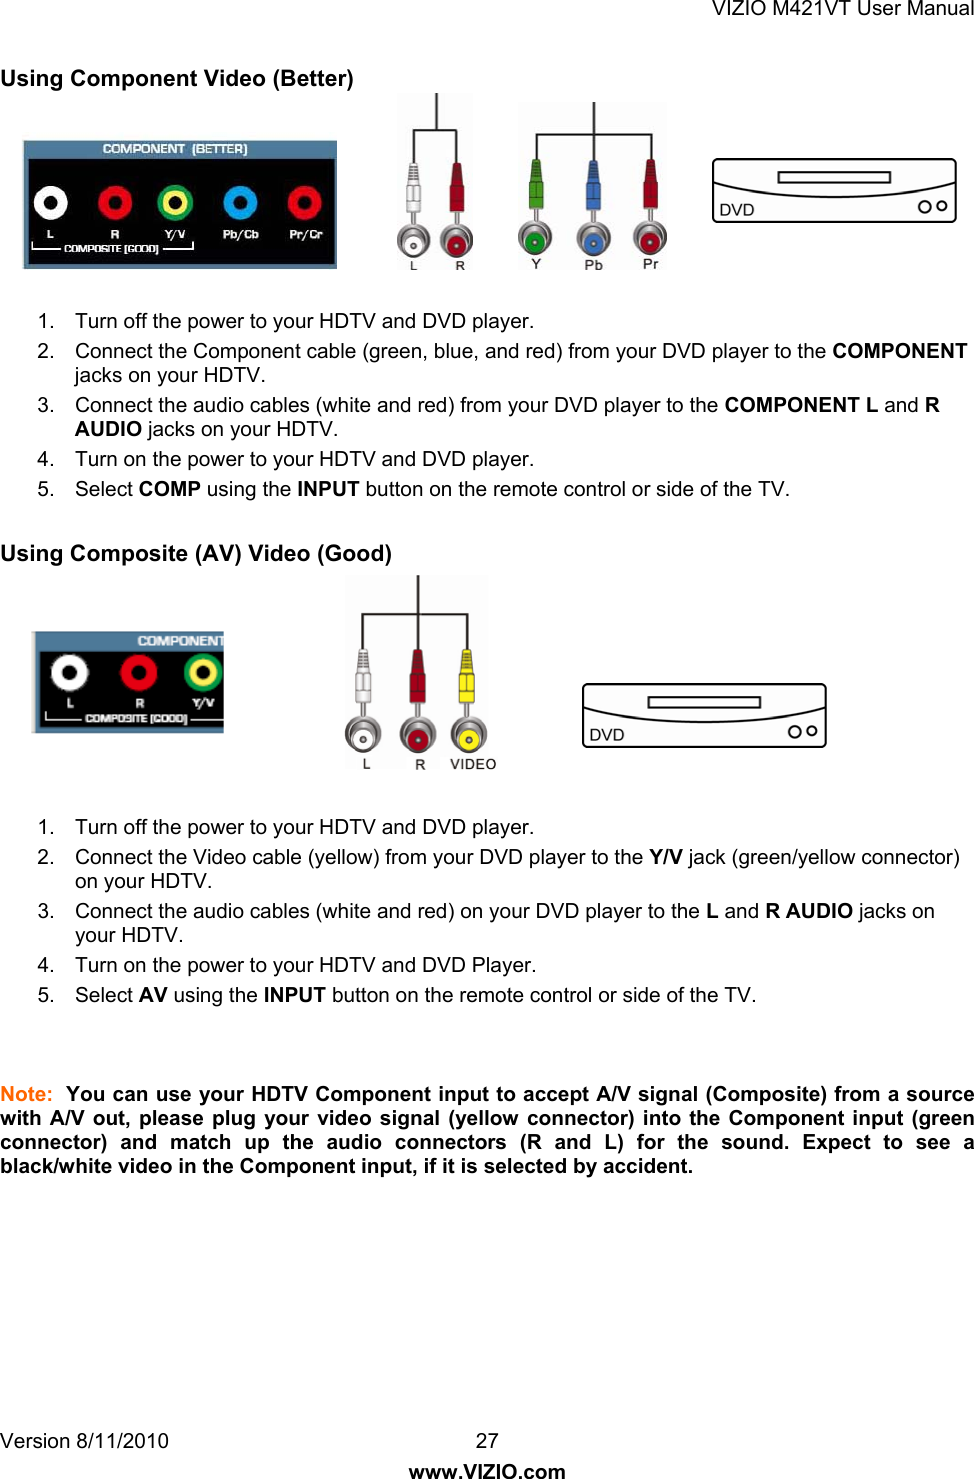 VIZIO M421VT User Manual Version 8/11/2010  27   www.VIZIO.com Using Component Video (Better)        1.  Turn off the power to your HDTV and DVD player. 2.  Connect the Component cable (green, blue, and red) from your DVD player to the COMPONENT jacks on your HDTV. 3.  Connect the audio cables (white and red) from your DVD player to the COMPONENT L and R AUDIO jacks on your HDTV. 4.  Turn on the power to your HDTV and DVD player. 5. Select COMP using the INPUT button on the remote control or side of the TV.  Using Composite (AV) Video (Good)         1.  Turn off the power to your HDTV and DVD player. 2.  Connect the Video cable (yellow) from your DVD player to the Y/V jack (green/yellow connector) on your HDTV. 3.  Connect the audio cables (white and red) on your DVD player to the L and R AUDIO jacks on your HDTV. 4.  Turn on the power to your HDTV and DVD Player. 5. Select AV using the INPUT button on the remote control or side of the TV.   Note:  You can use your HDTV Component input to accept A/V signal (Composite) from a source with A/V out, please plug your video signal (yellow connector) into the Component input (green connector) and match up the audio connectors (R and L) for the sound. Expect to see a black/white video in the Component input, if it is selected by accident. 